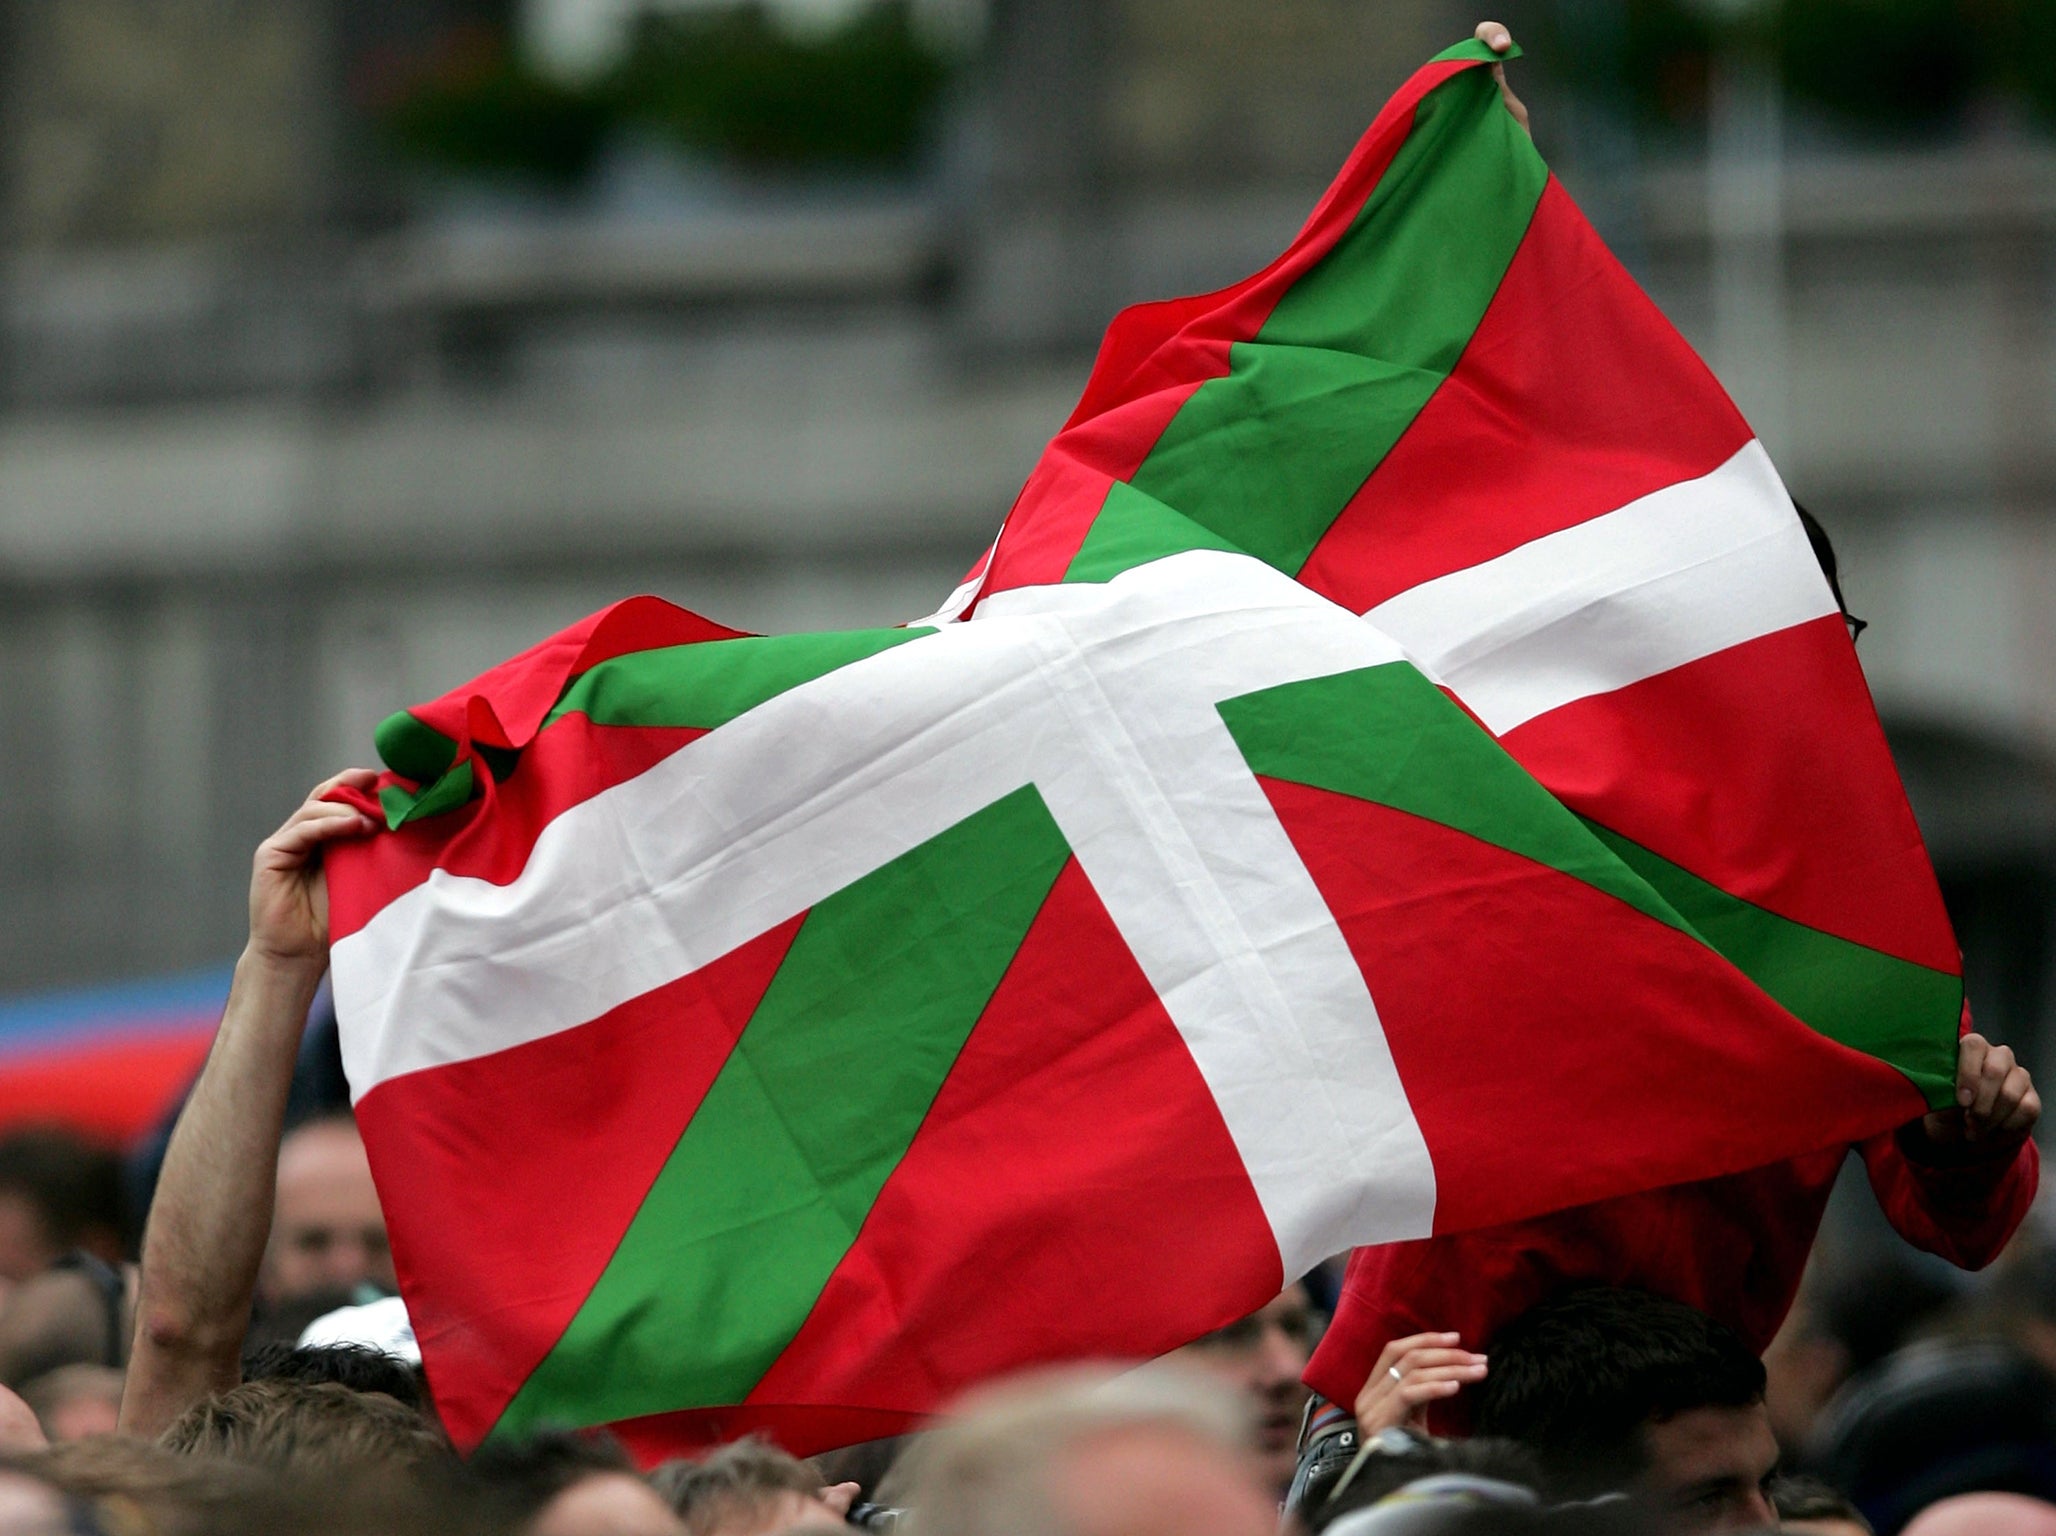 The Basque country has a large degree of self-rule